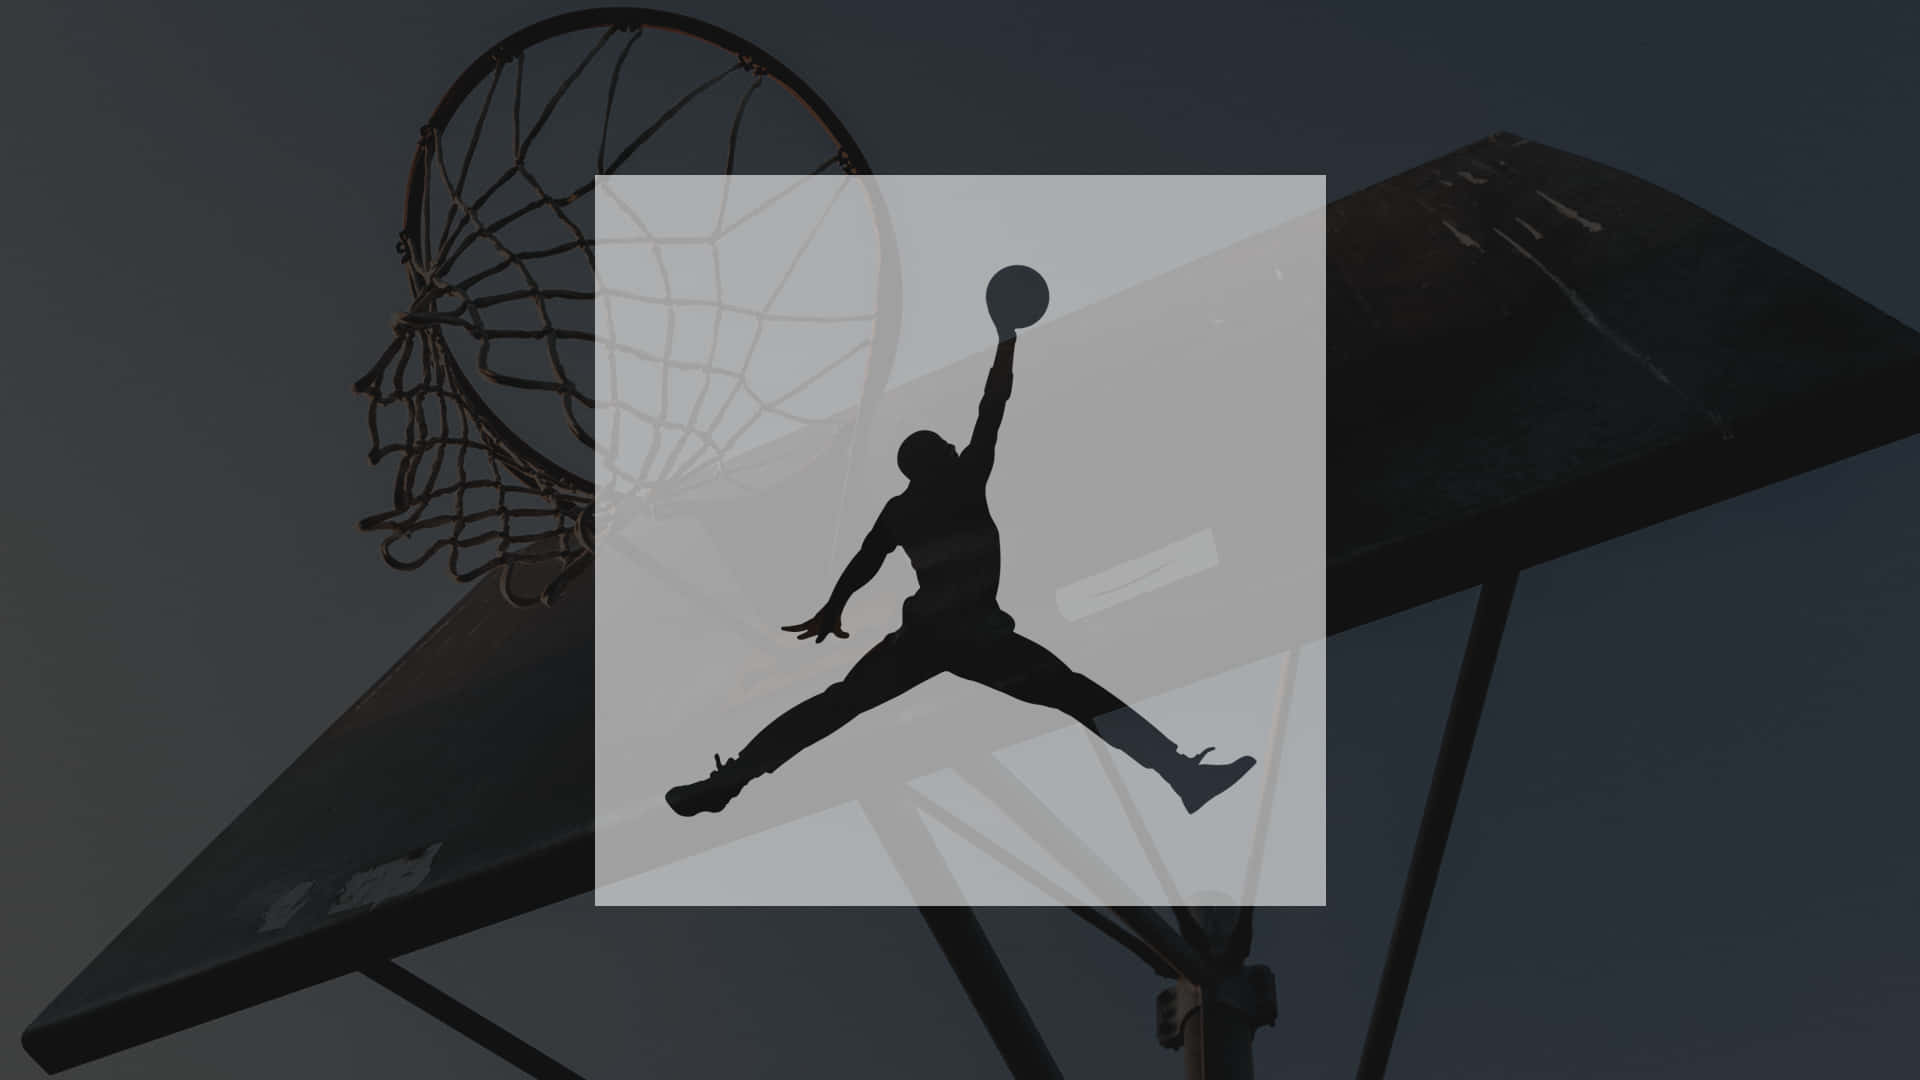 A Basketball Player Is Jumping Into A Hoop